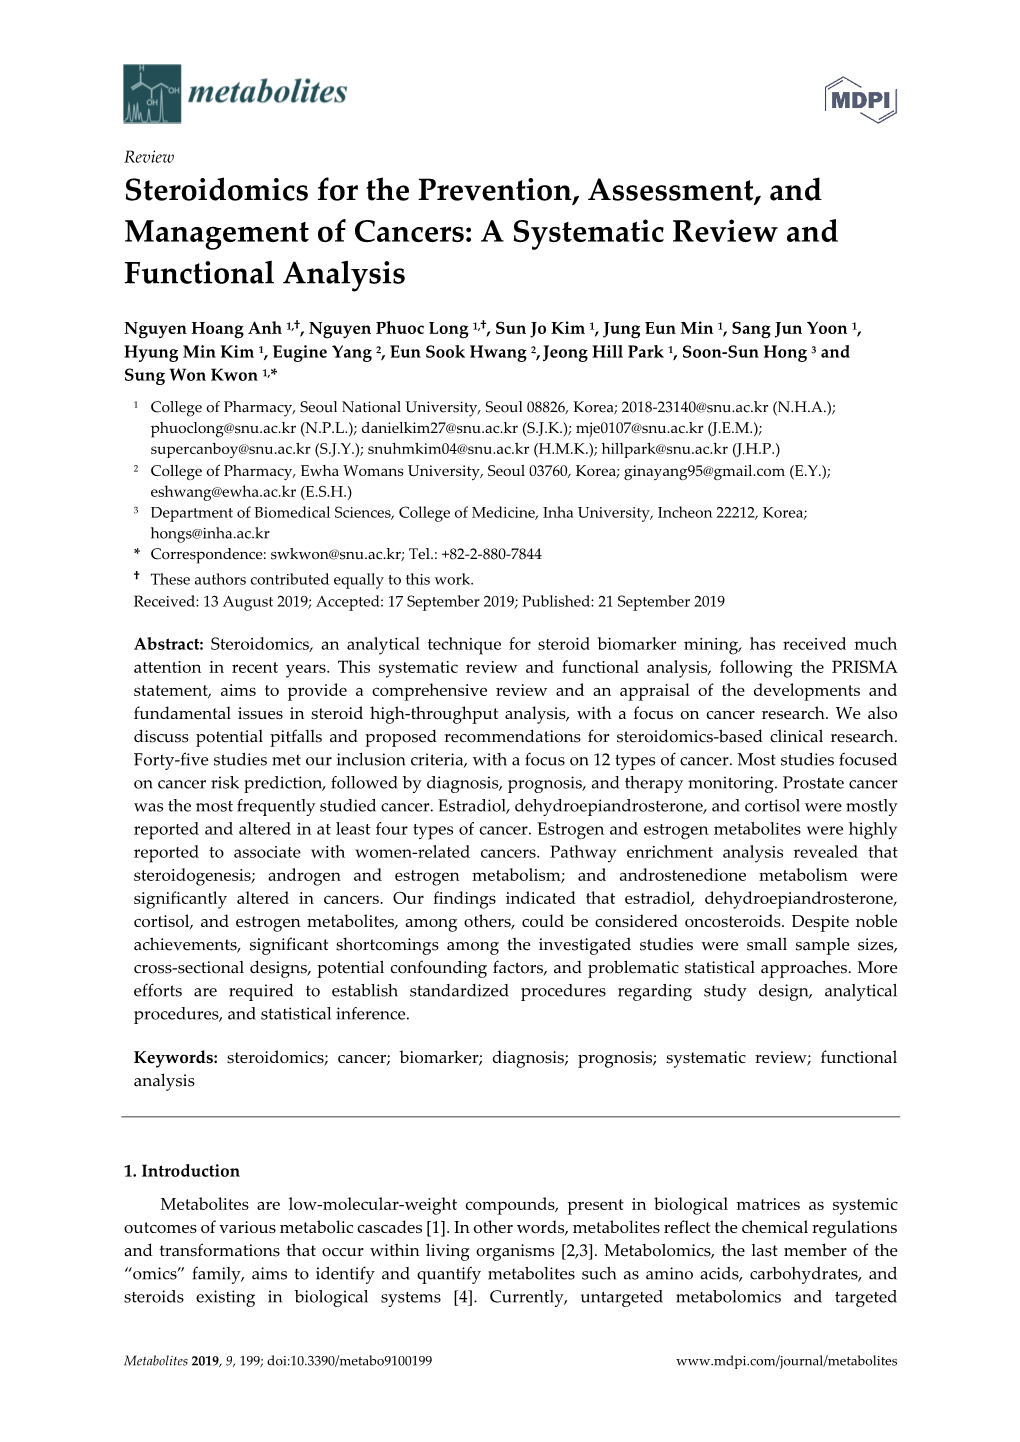 Steroidomics for the Prevention, Assessment, and Management of Cancers: a Systematic Review and Functional Analysis